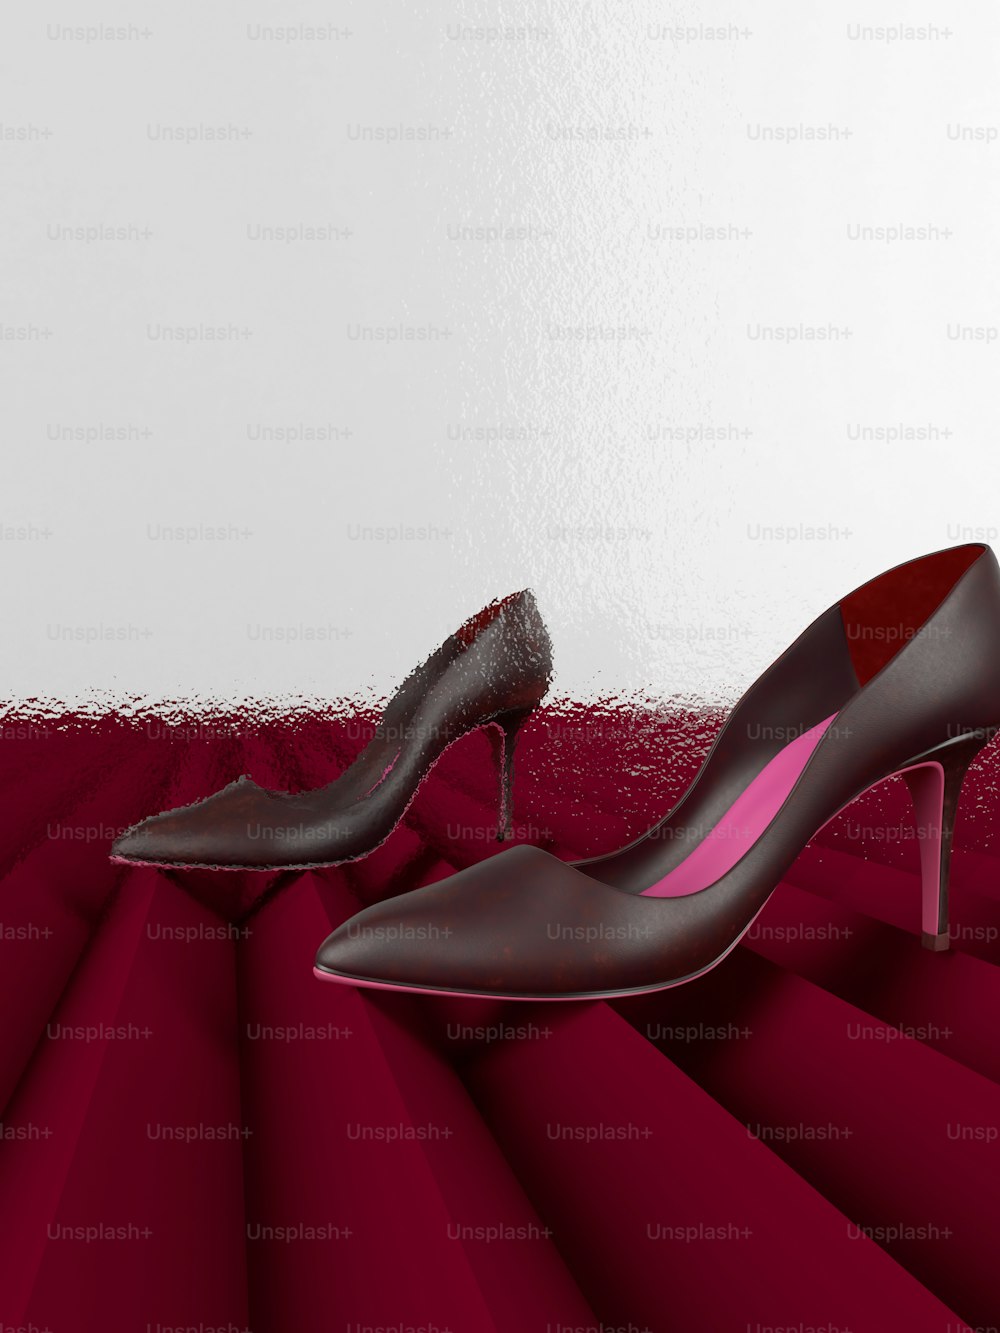 a pair of high heeled shoes on a red and white background